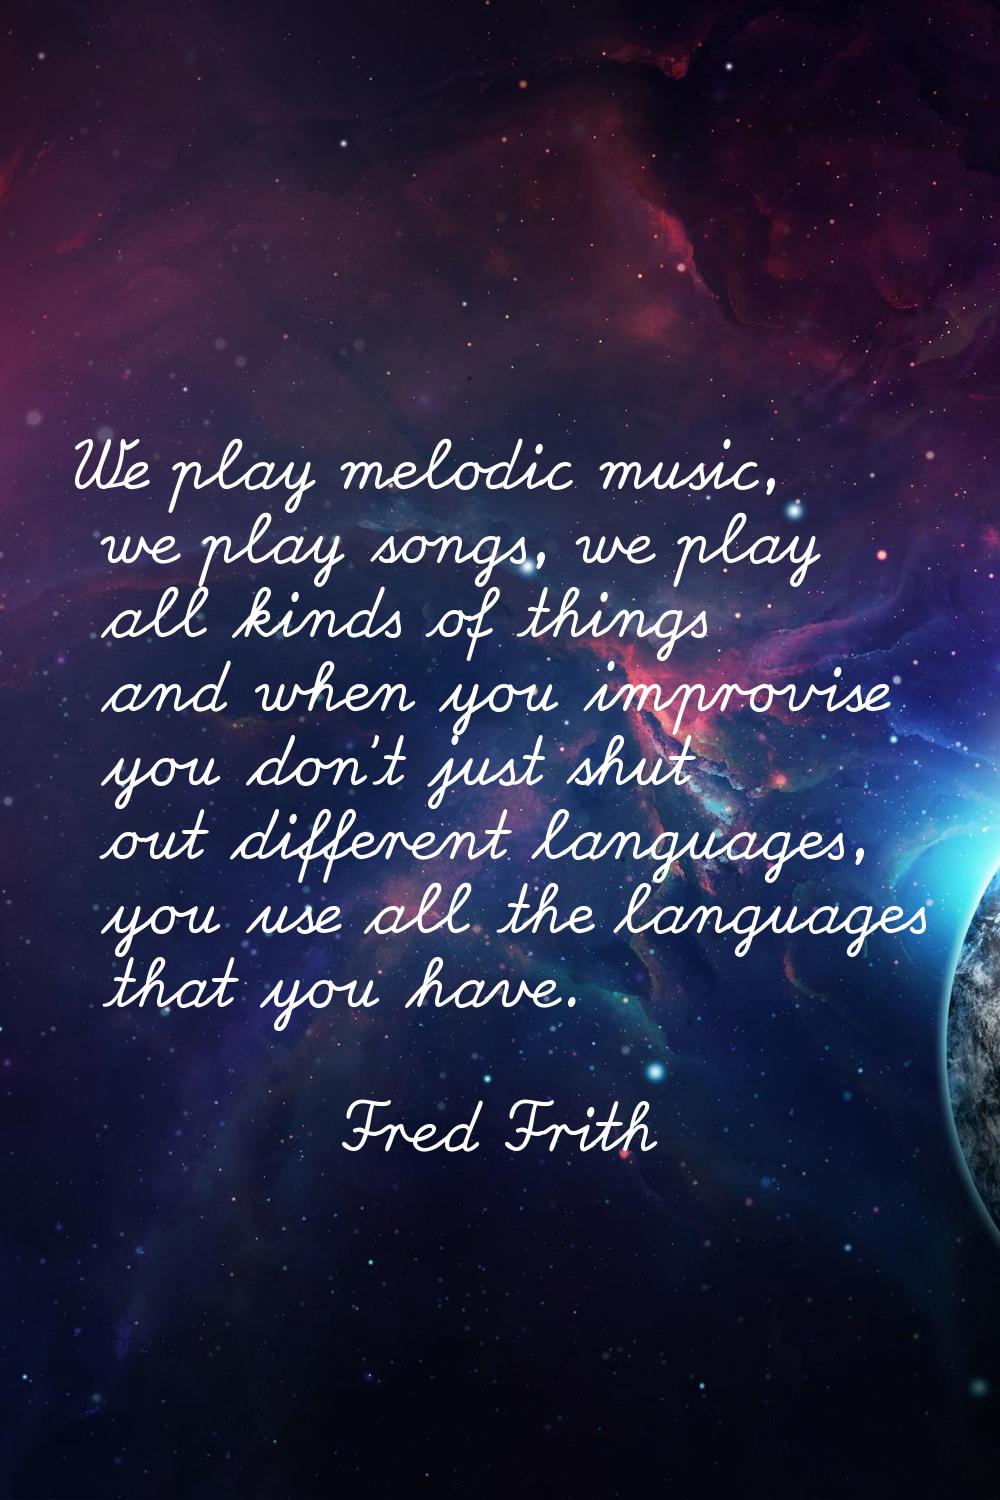 We play melodic music, we play songs, we play all kinds of things and when you improvise you don't 